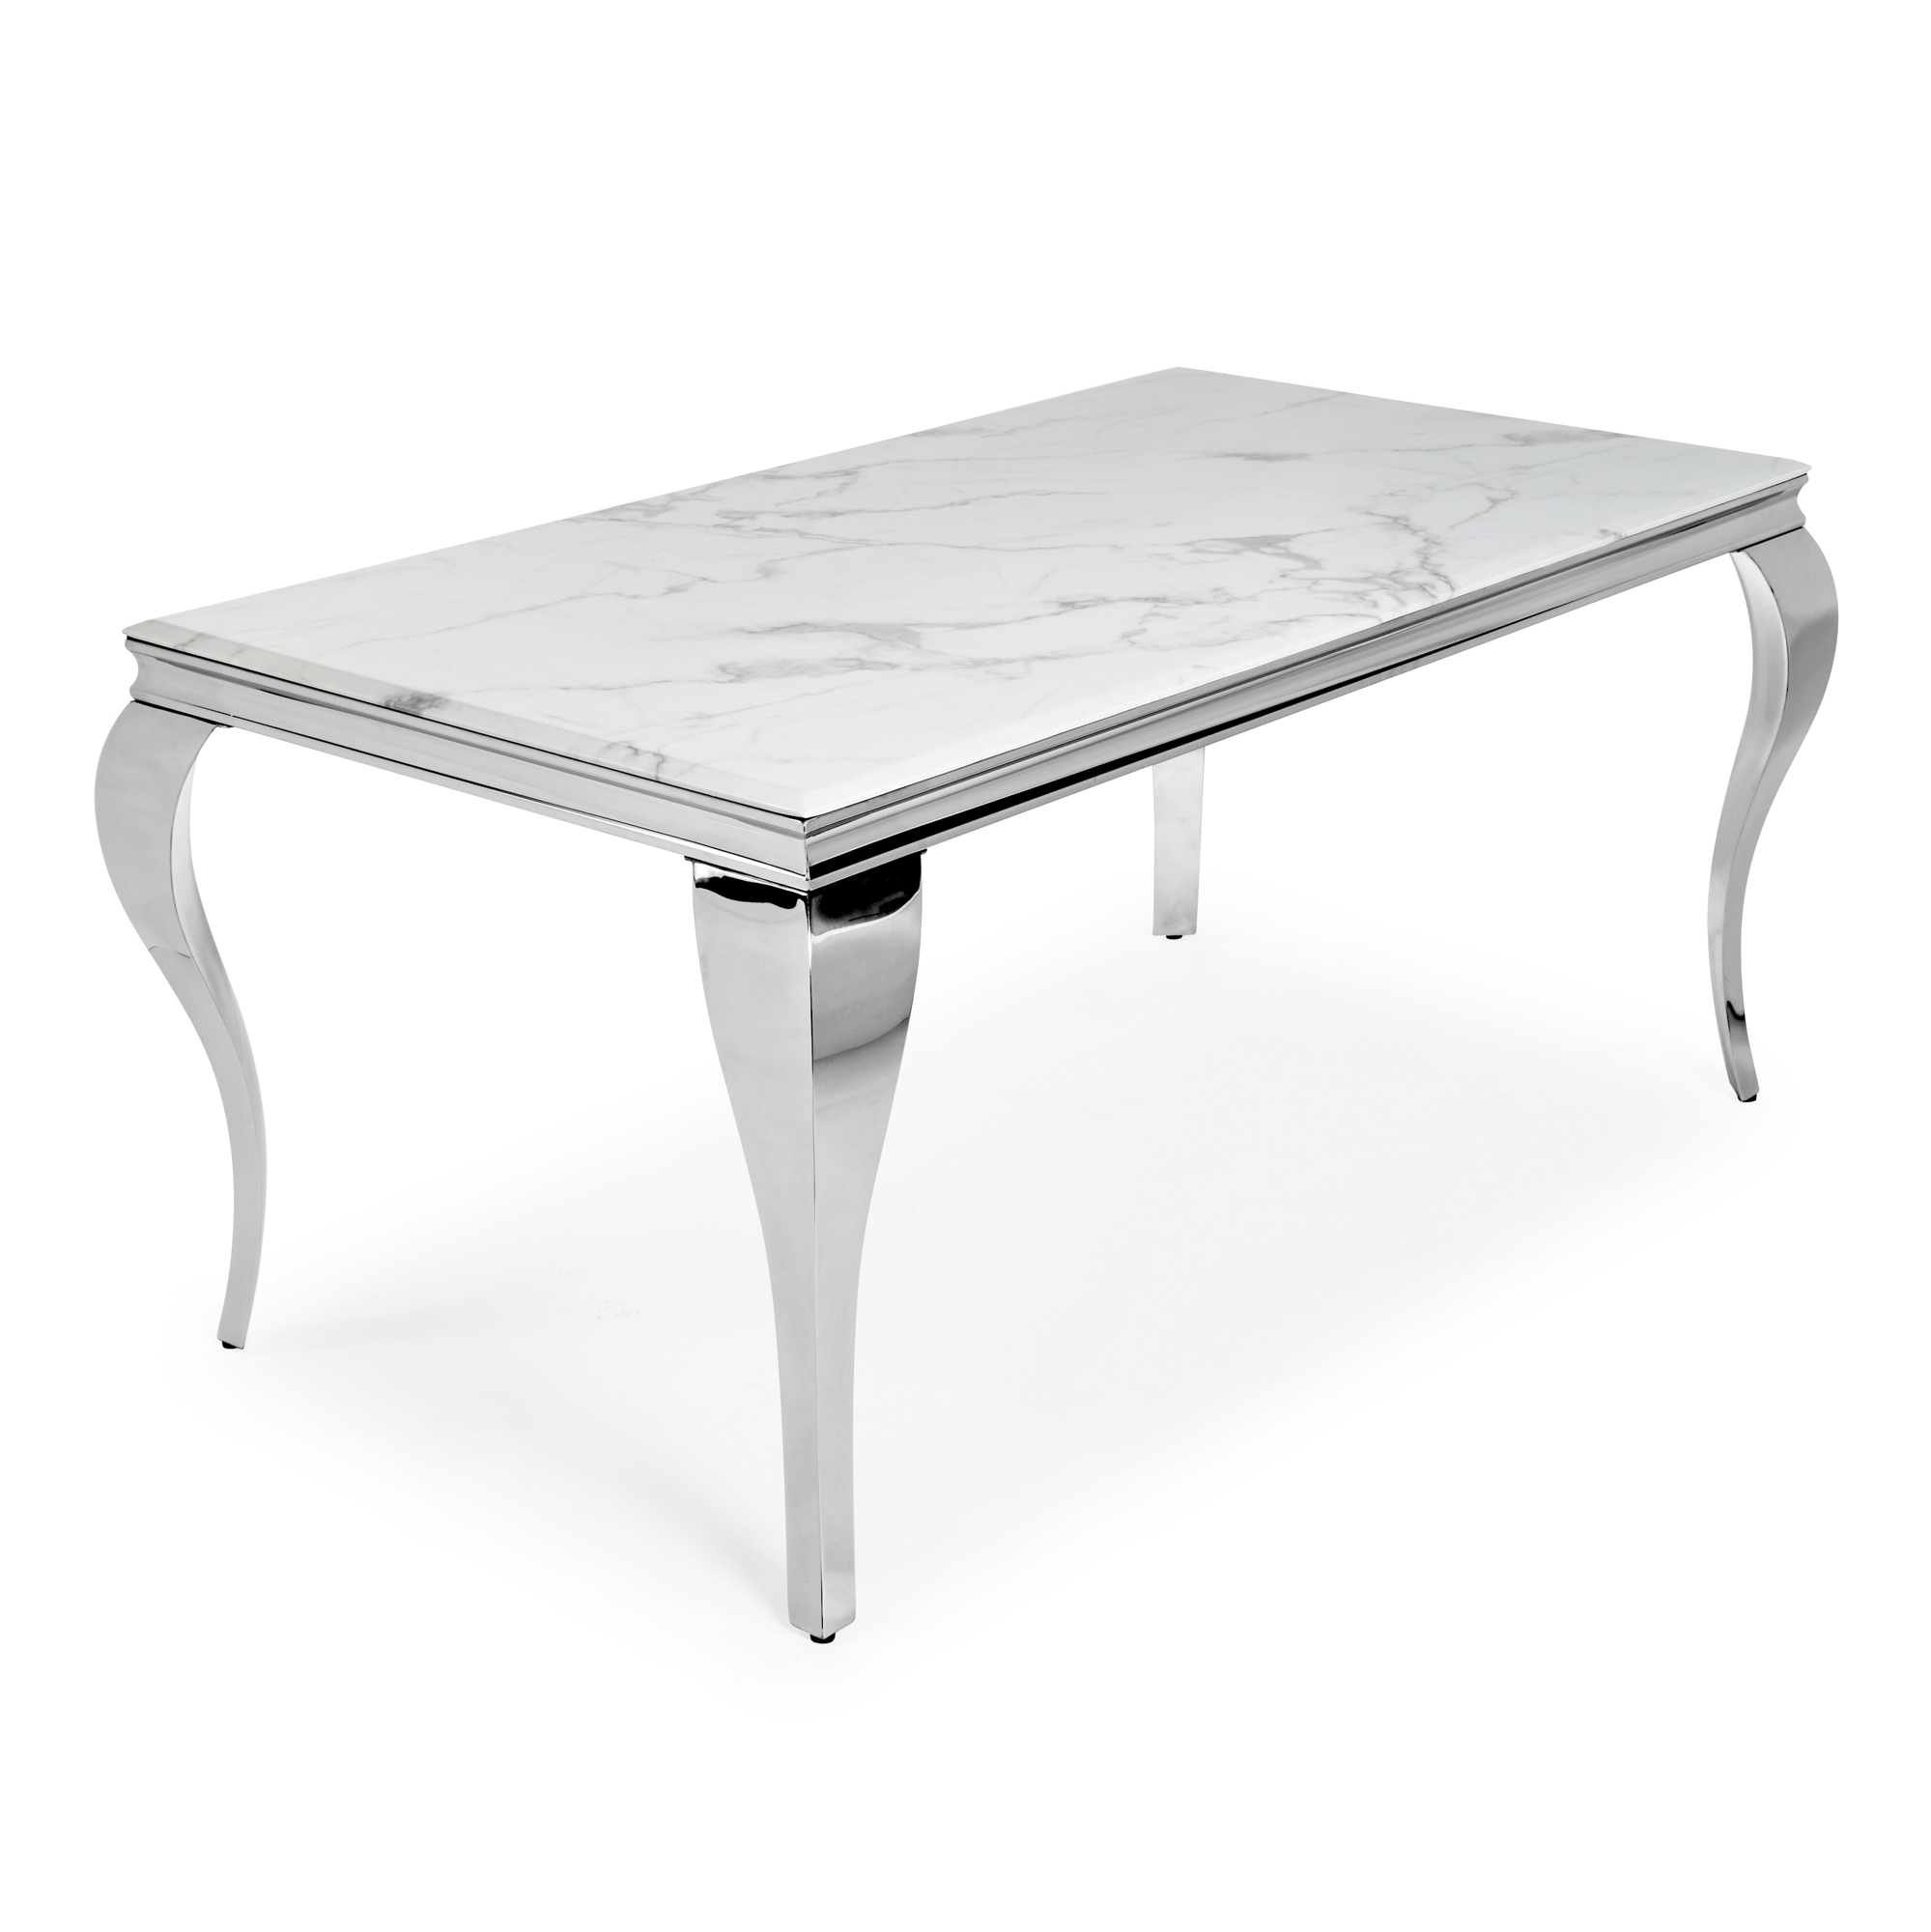 1.6m Louis White Dining Table with Solid Marble Top & Polished Steel Frame